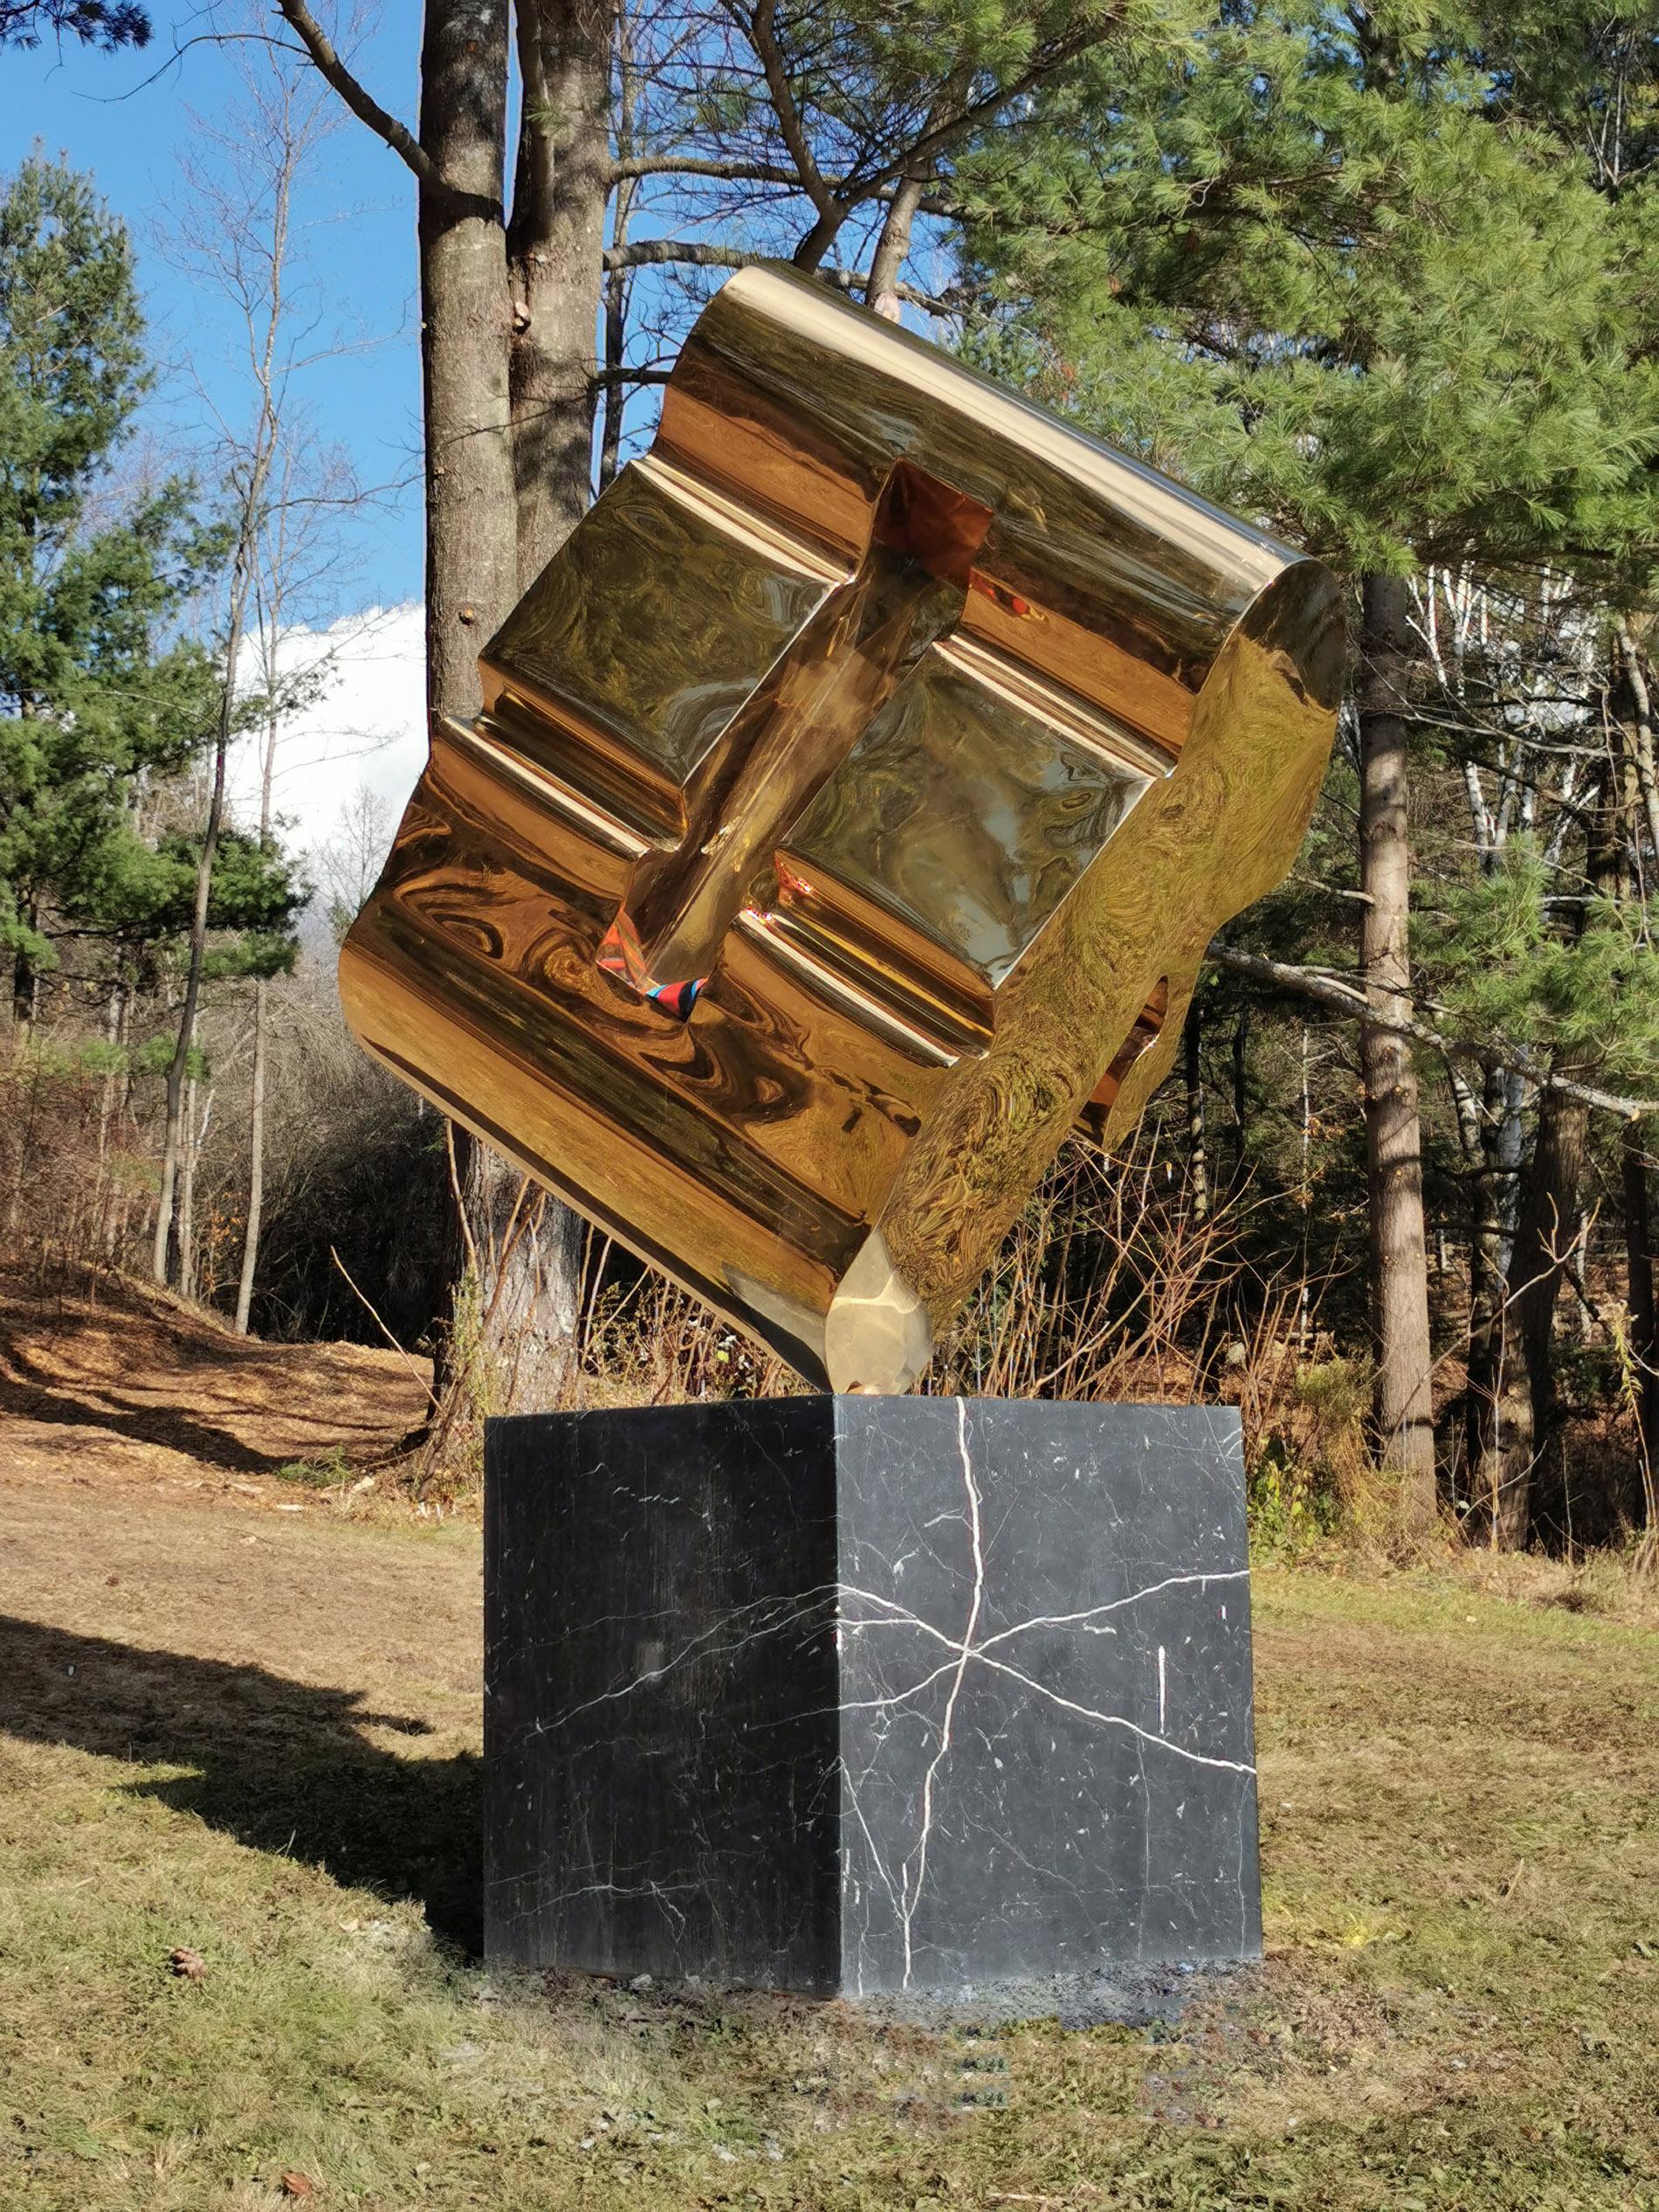 CaELum - large, abstract, 24kt gold plated, stainless steel outdoor sculpture - Contemporary Sculpture by Viktor Mitic